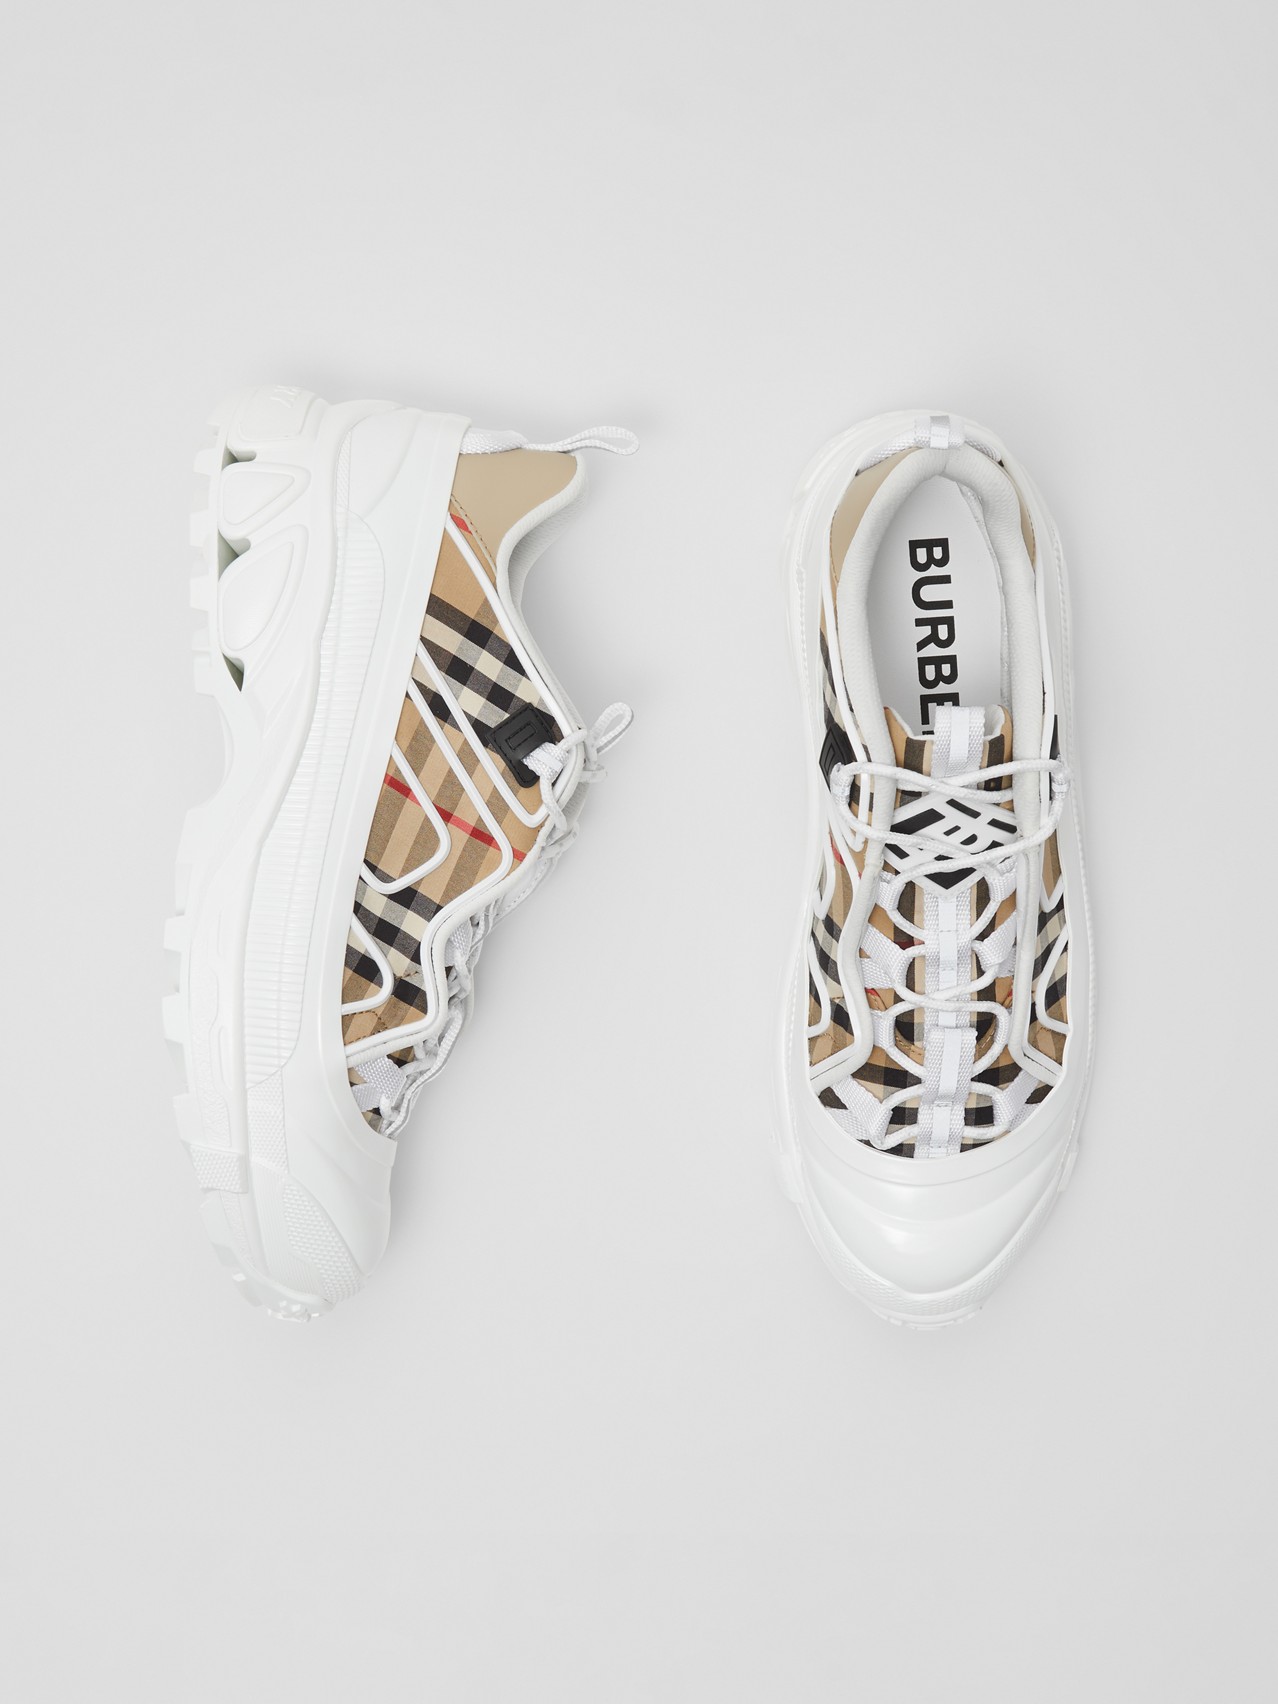 Vintage Check Cotton and Leather Arthur Sneakers by Burberry, available on burberry.com for $690 Bella Hadid Shoes SIMILAR PRODUCT